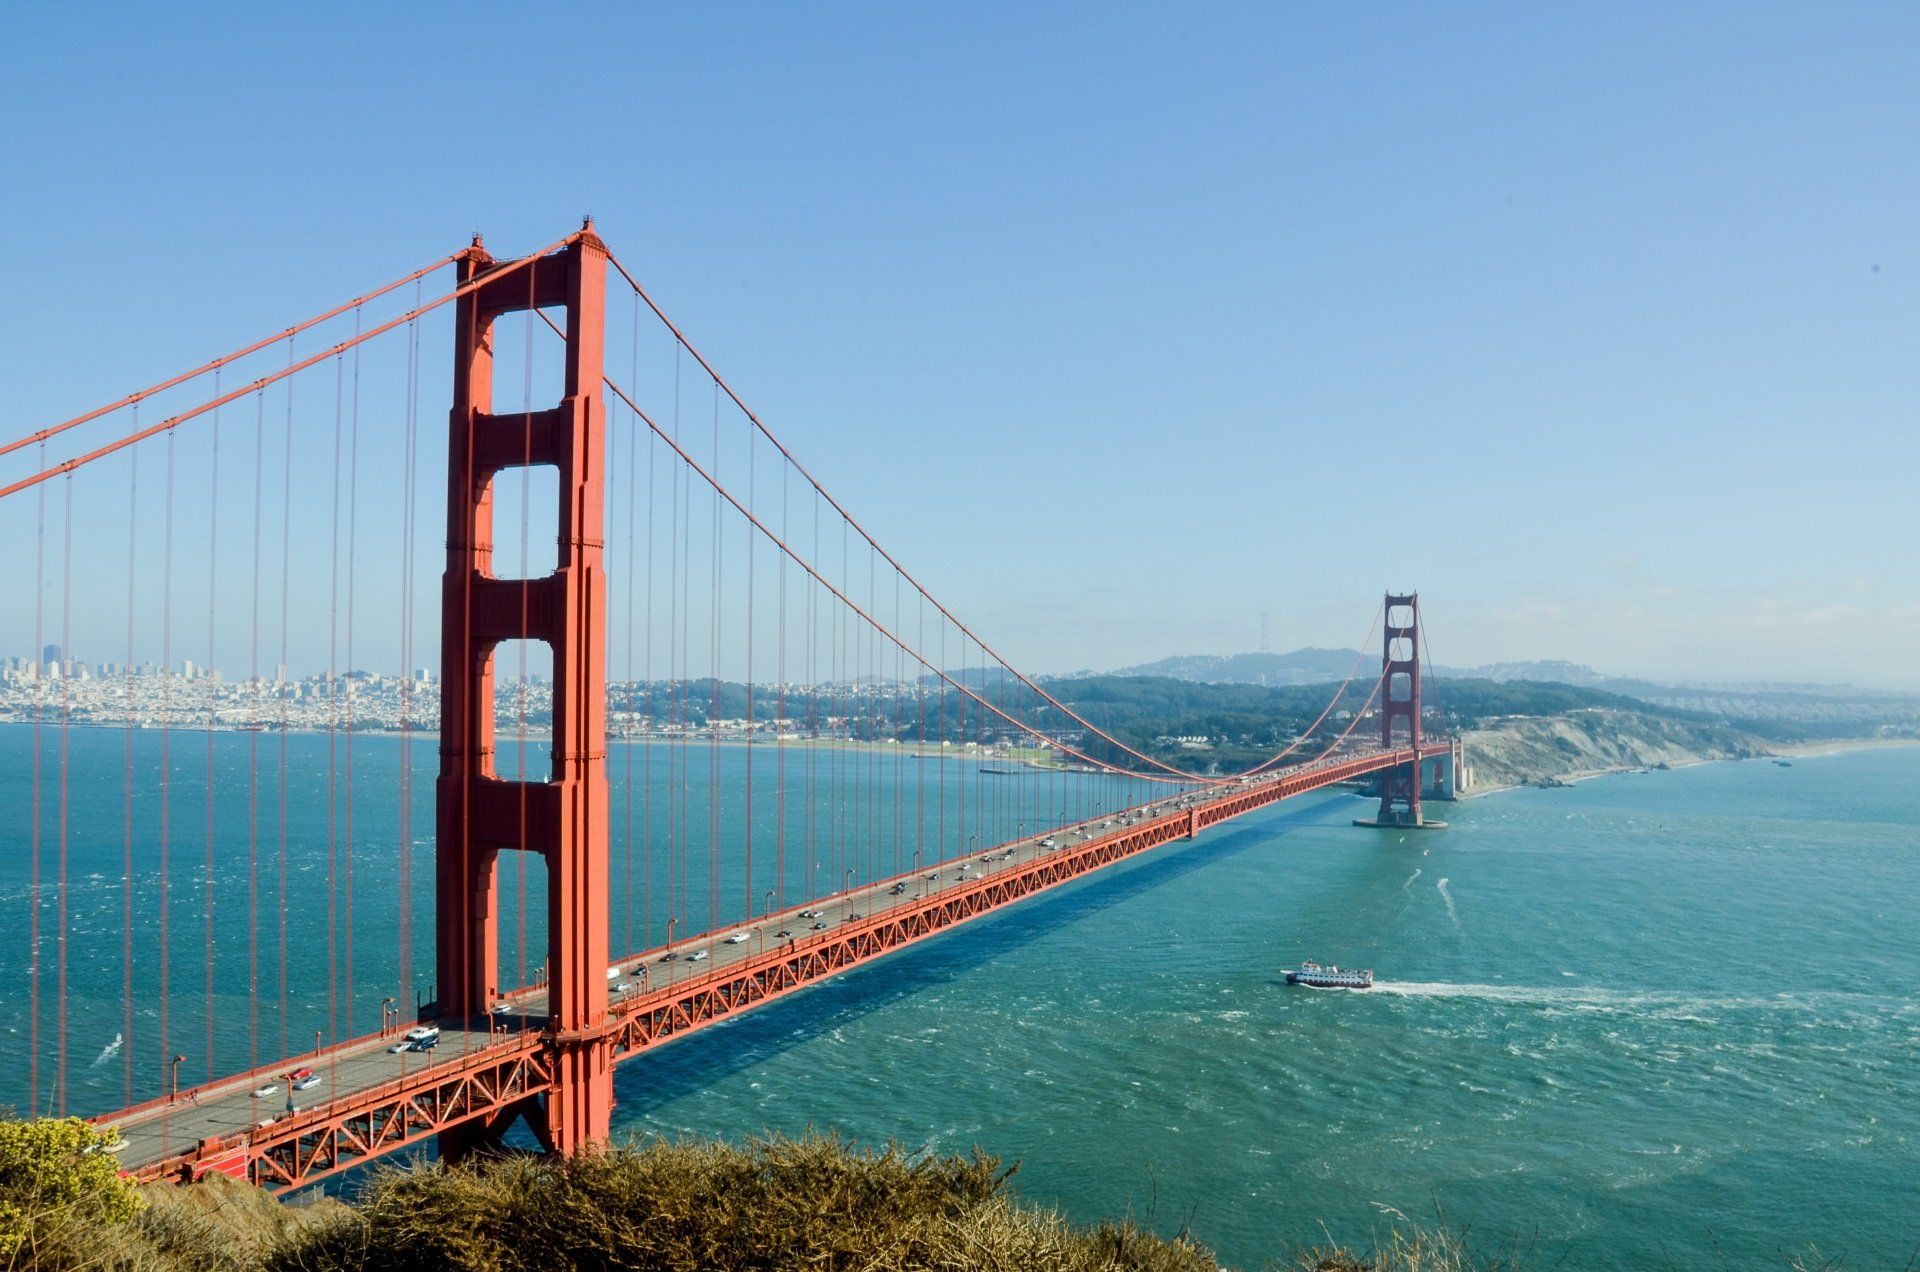 the golden gate bridge is a suspension bridge over a body of water .